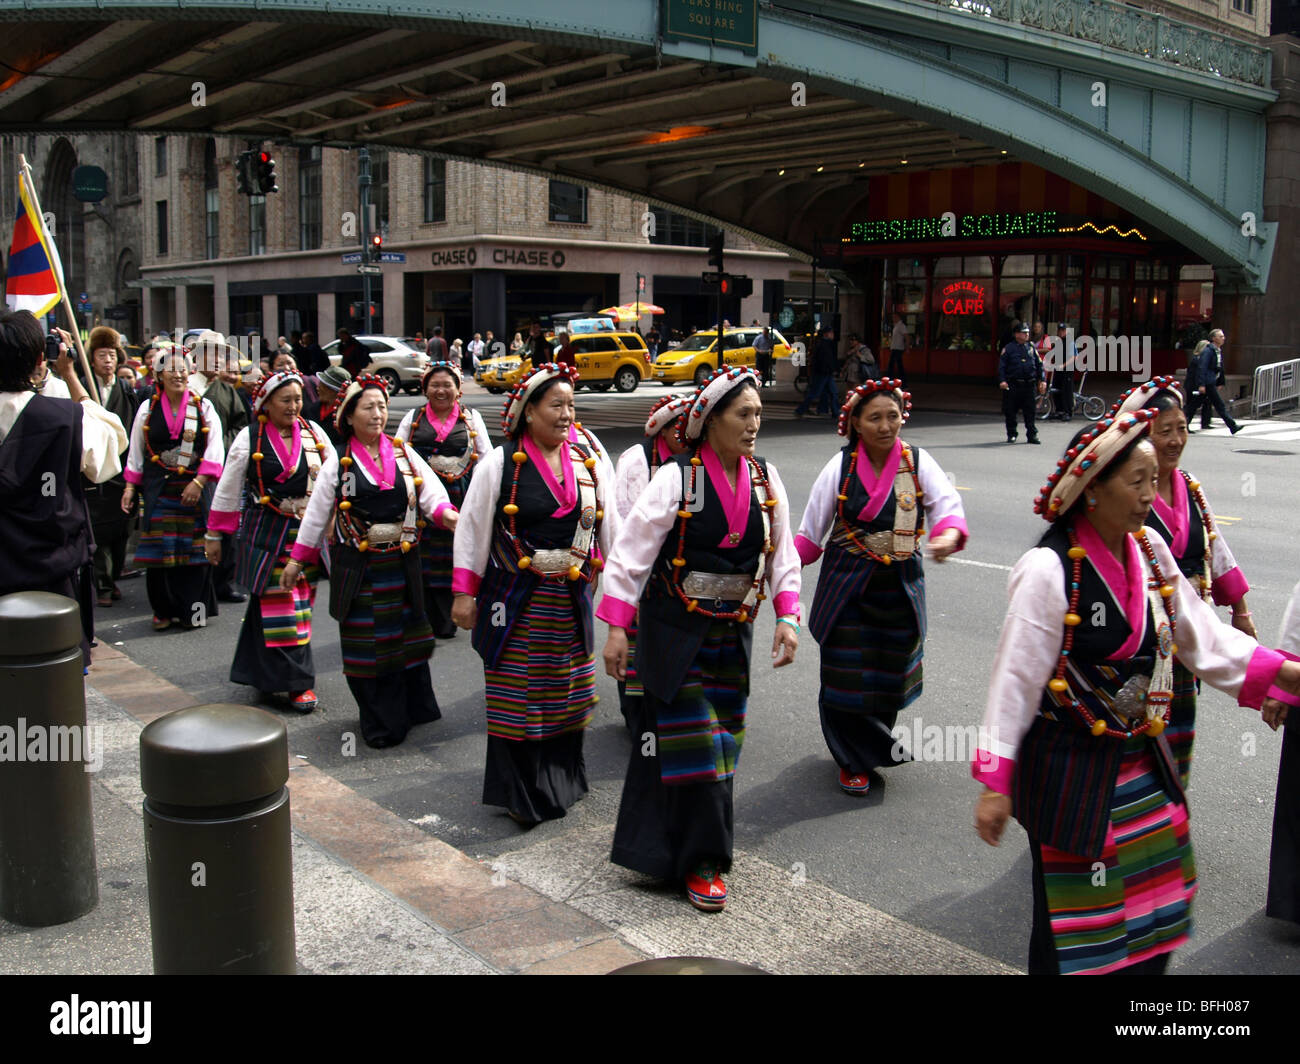 Tibetan parade in New York with smiling women in traditional costume showing a glimpse of their flag. Stock Photo